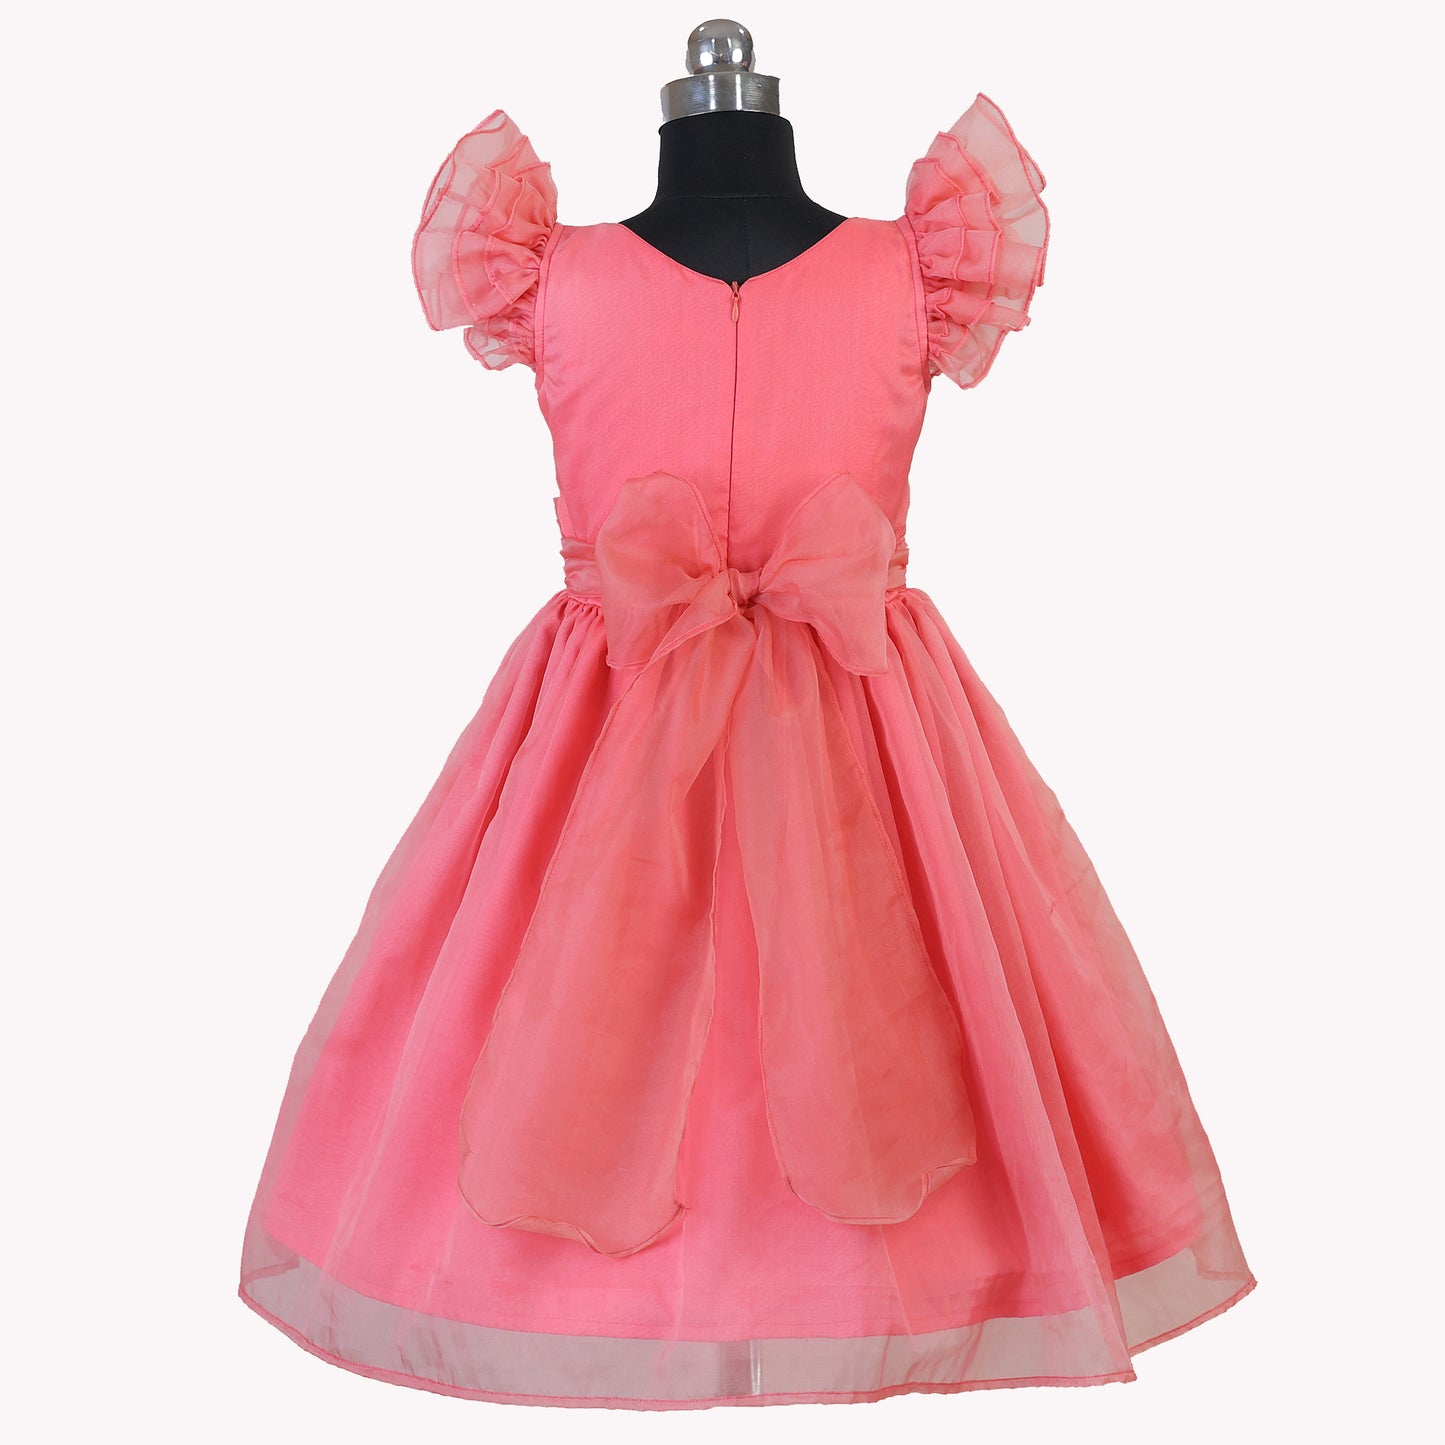 HEYKIDOO latest designer kids girls teens stylish comfortable Knee length birthday Party wear dress most beautiful frocks elegant Peach Solid 9 year frock online shopping fashionable quality trendy